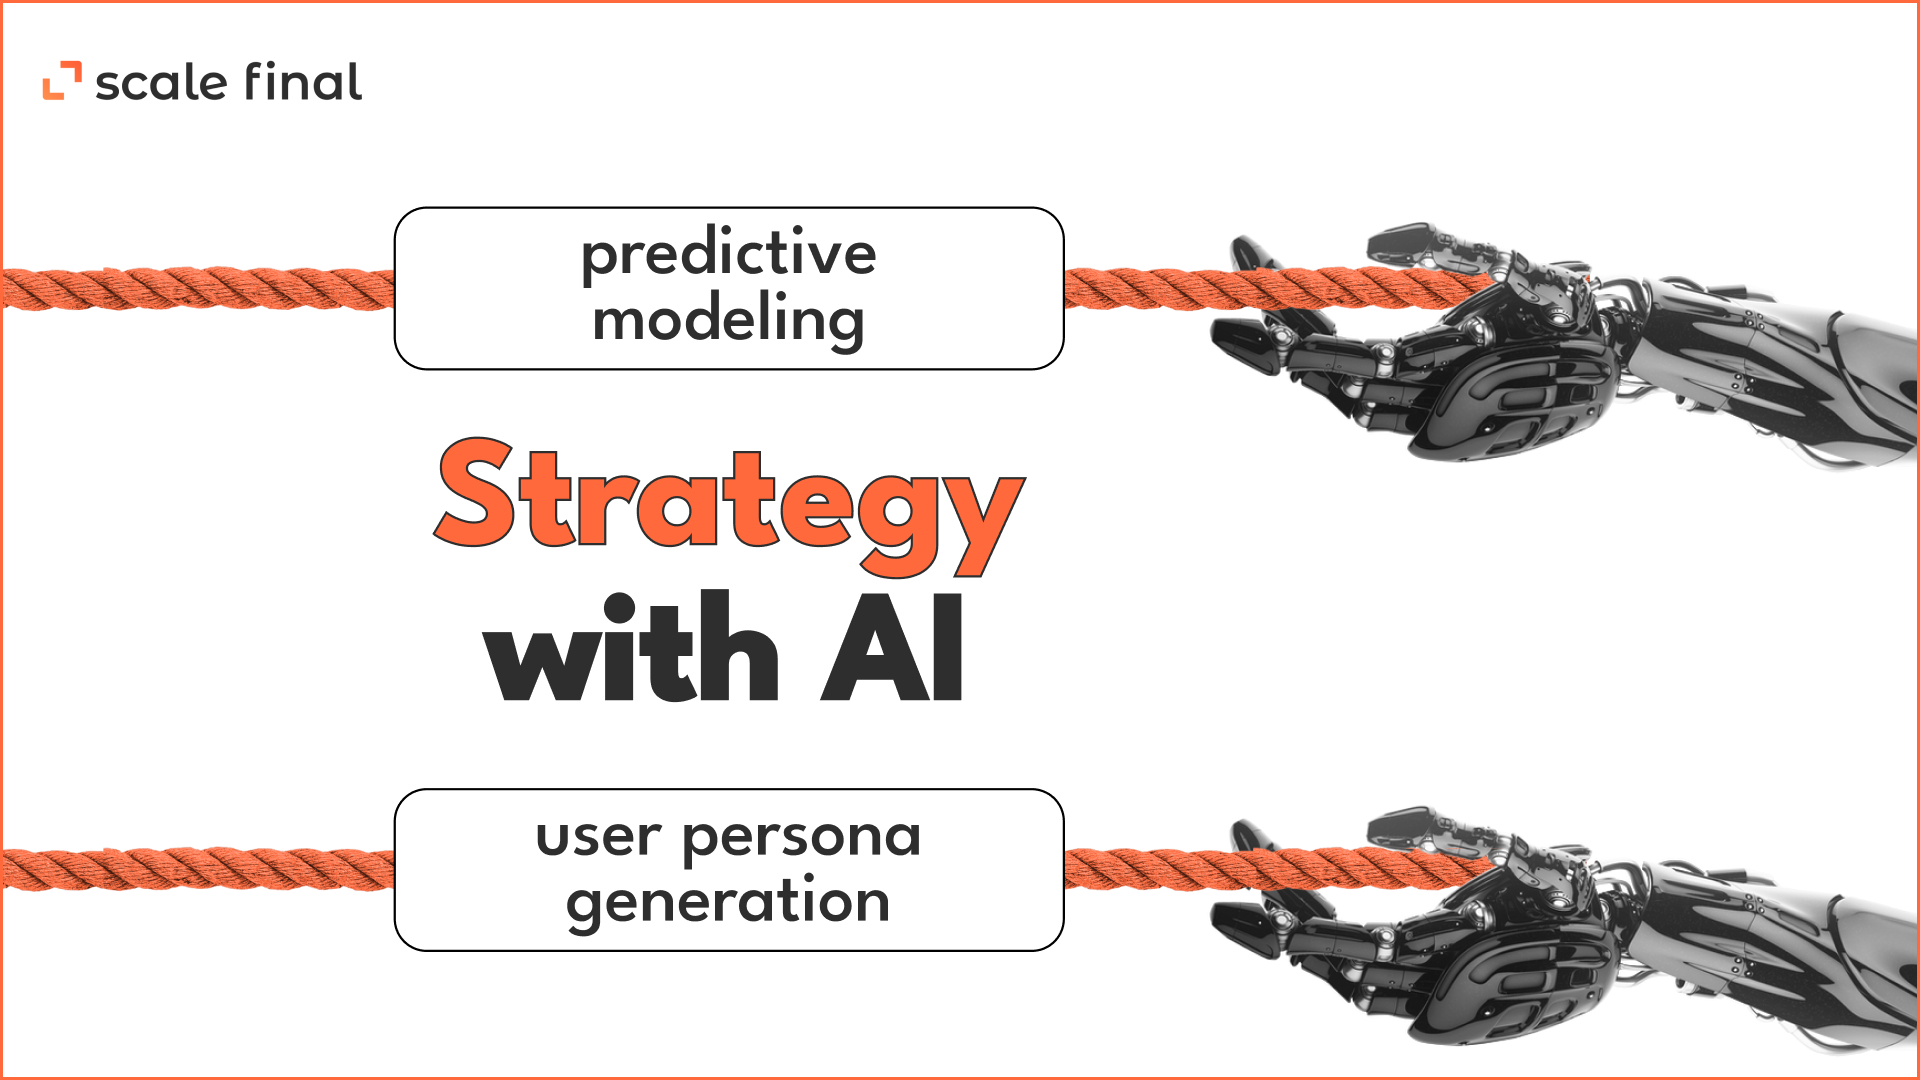 Strategy with AI predictive modeling user persona generation 